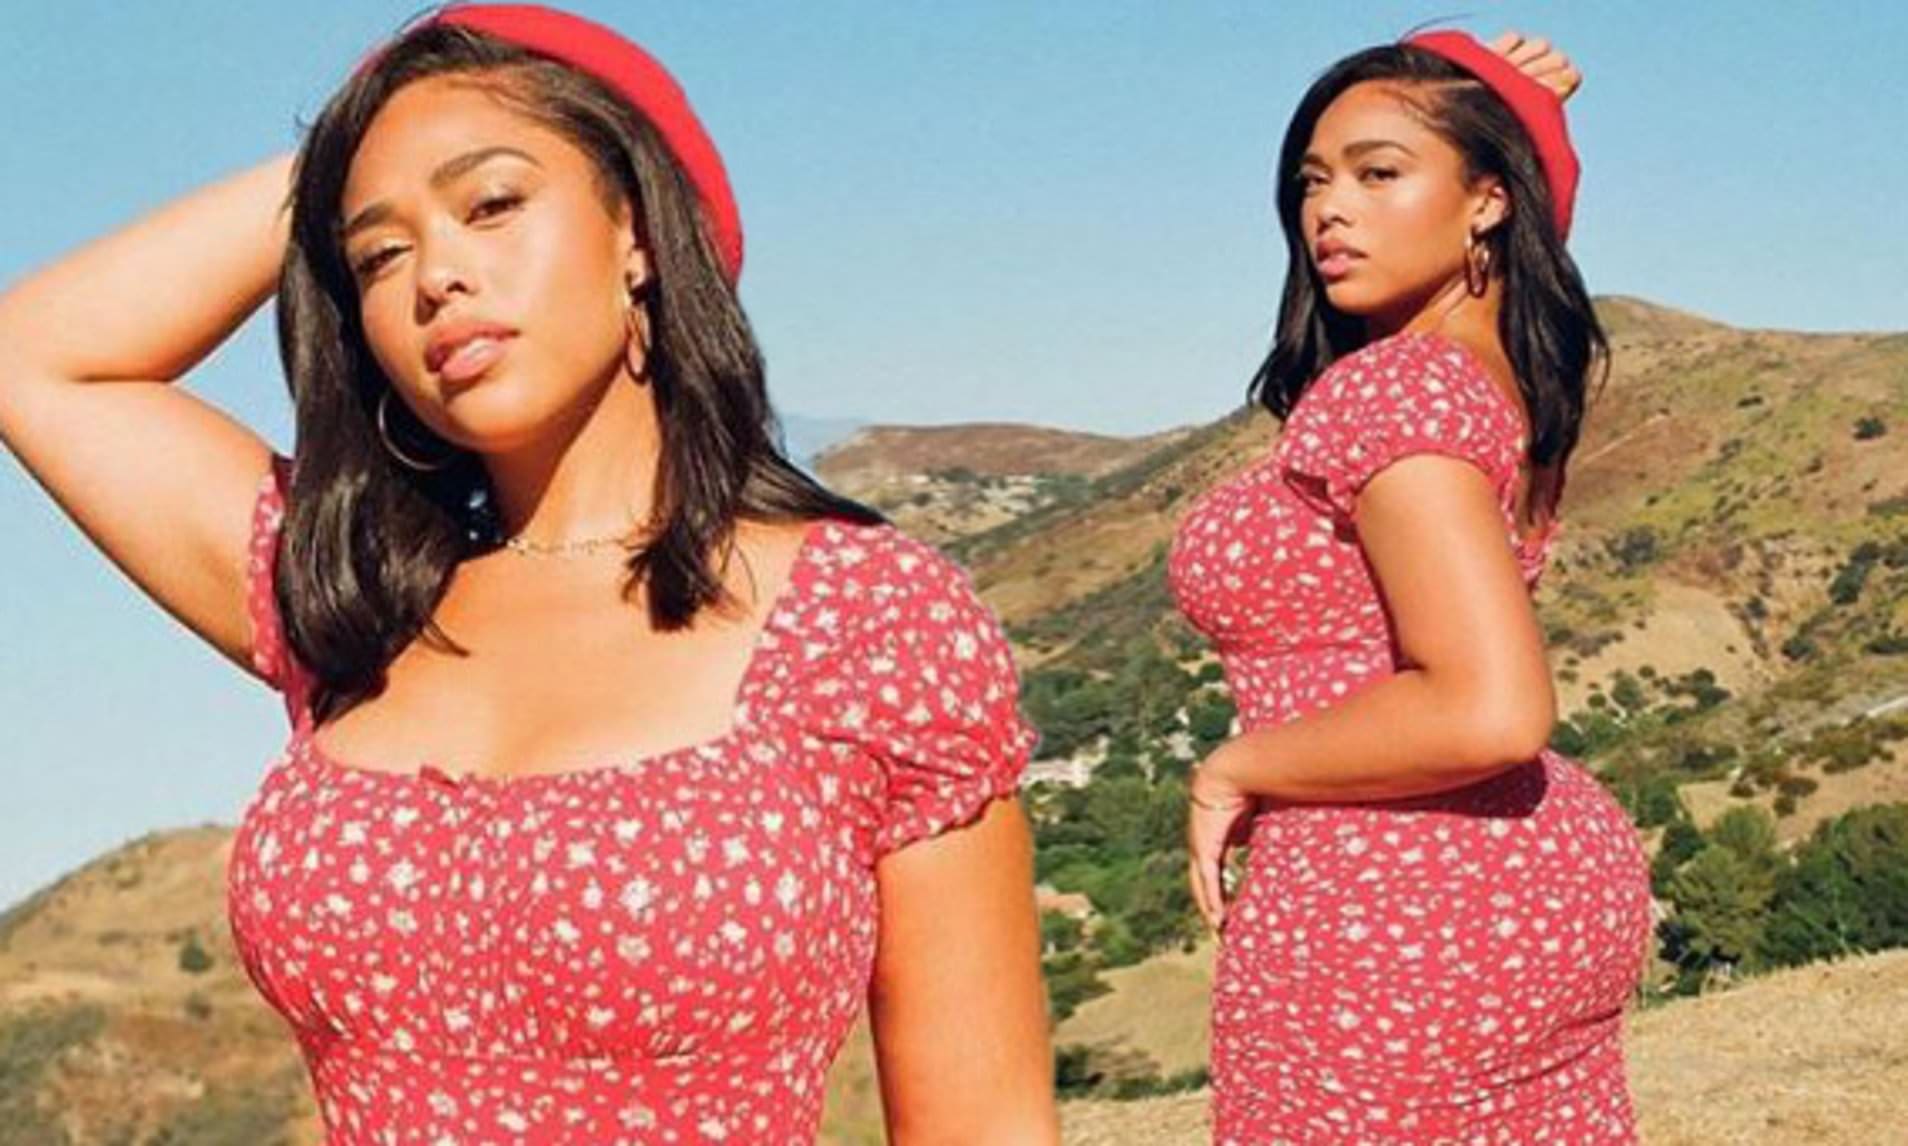 Jordyn Woods Is A Whole Meal In These Photos With Her BF - Check Out Her Generous Curves In This See-Through Dress; She Shades Khloe Kardashian